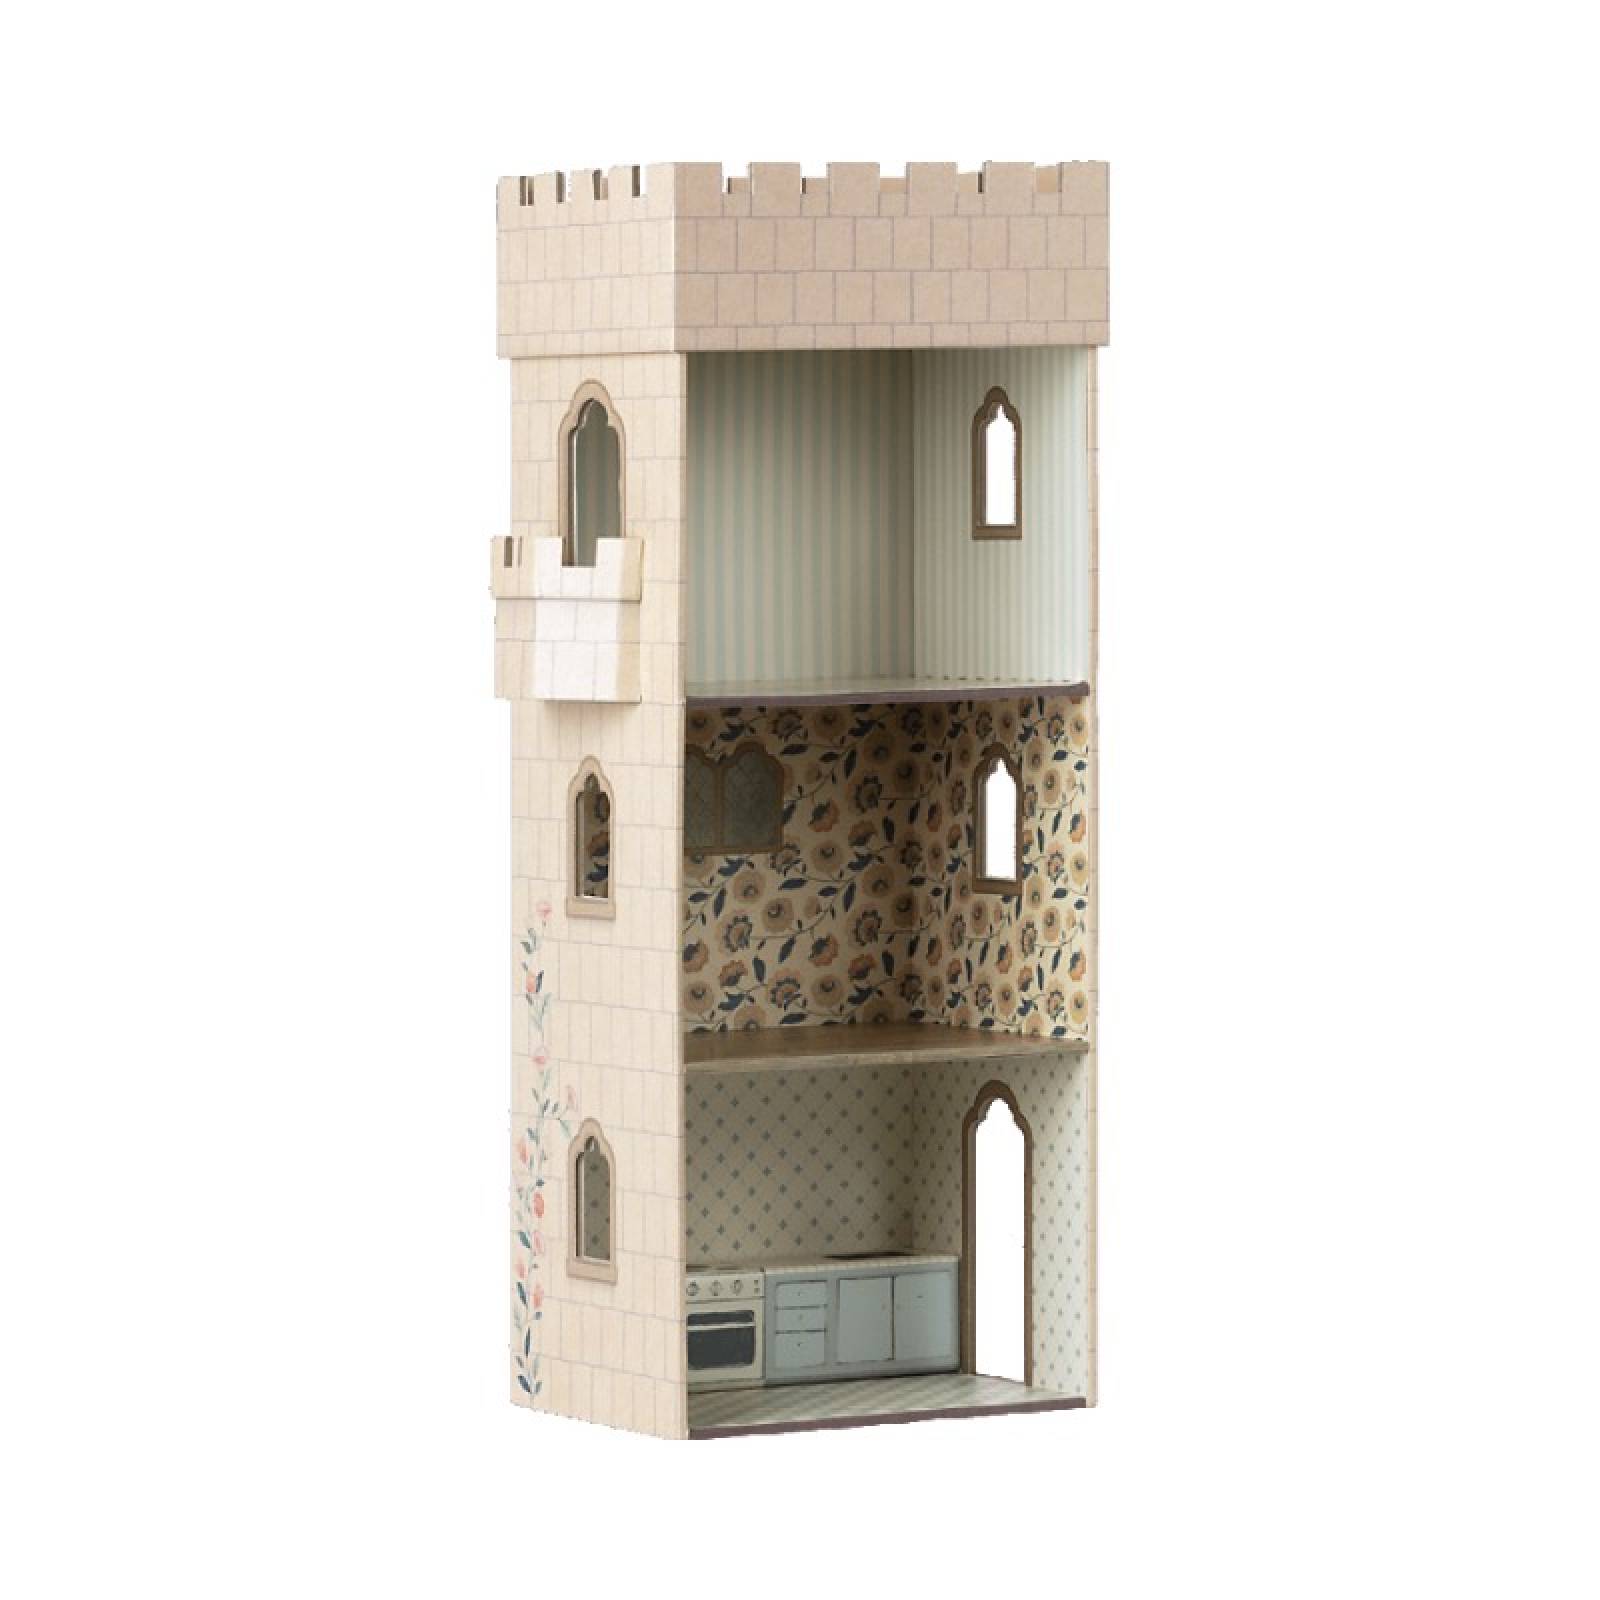 Castle With Kitchen Toy Playhouse By Maileg 3+ thumbnails